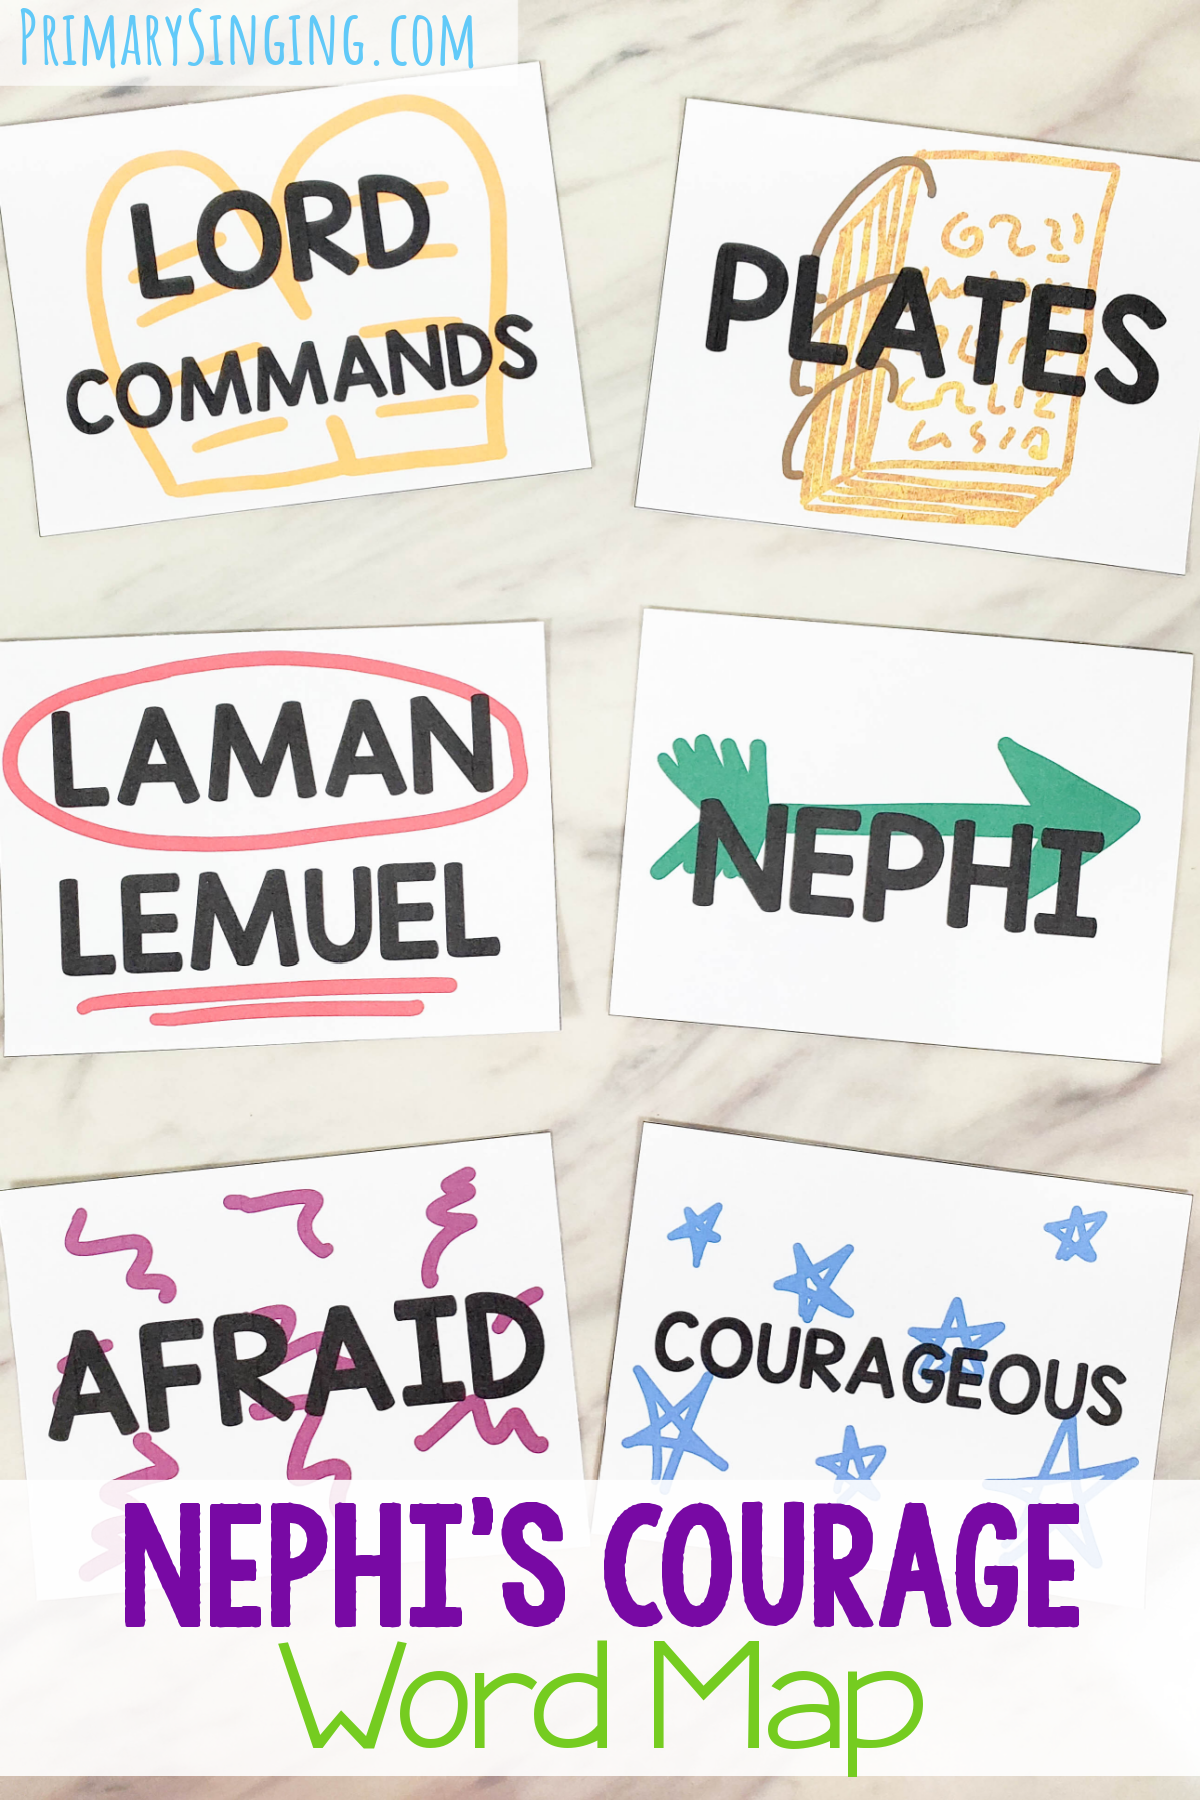 Nephi's Courage Word Map singing time activity to help you teach about being courageous even in hard times and trusting in the lord! Printable song helps for LDS Primary music leaders and families for Book of Mormon Come Follow Me.